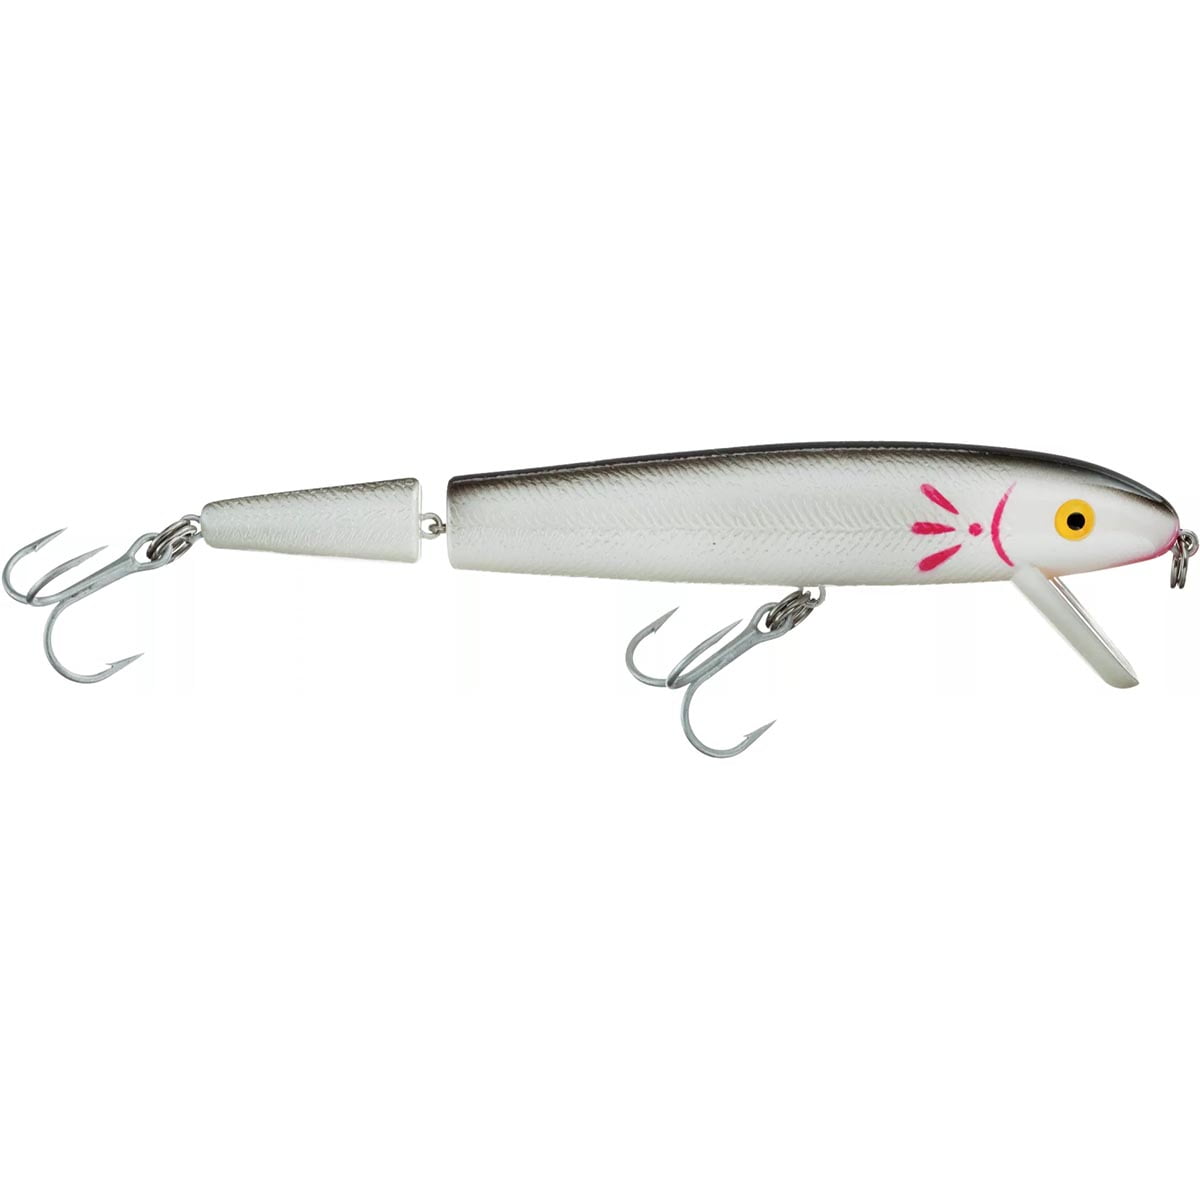 Cotton Cordell Jointed Red Fin 5/8 oz Fishing Lure - Red Head 